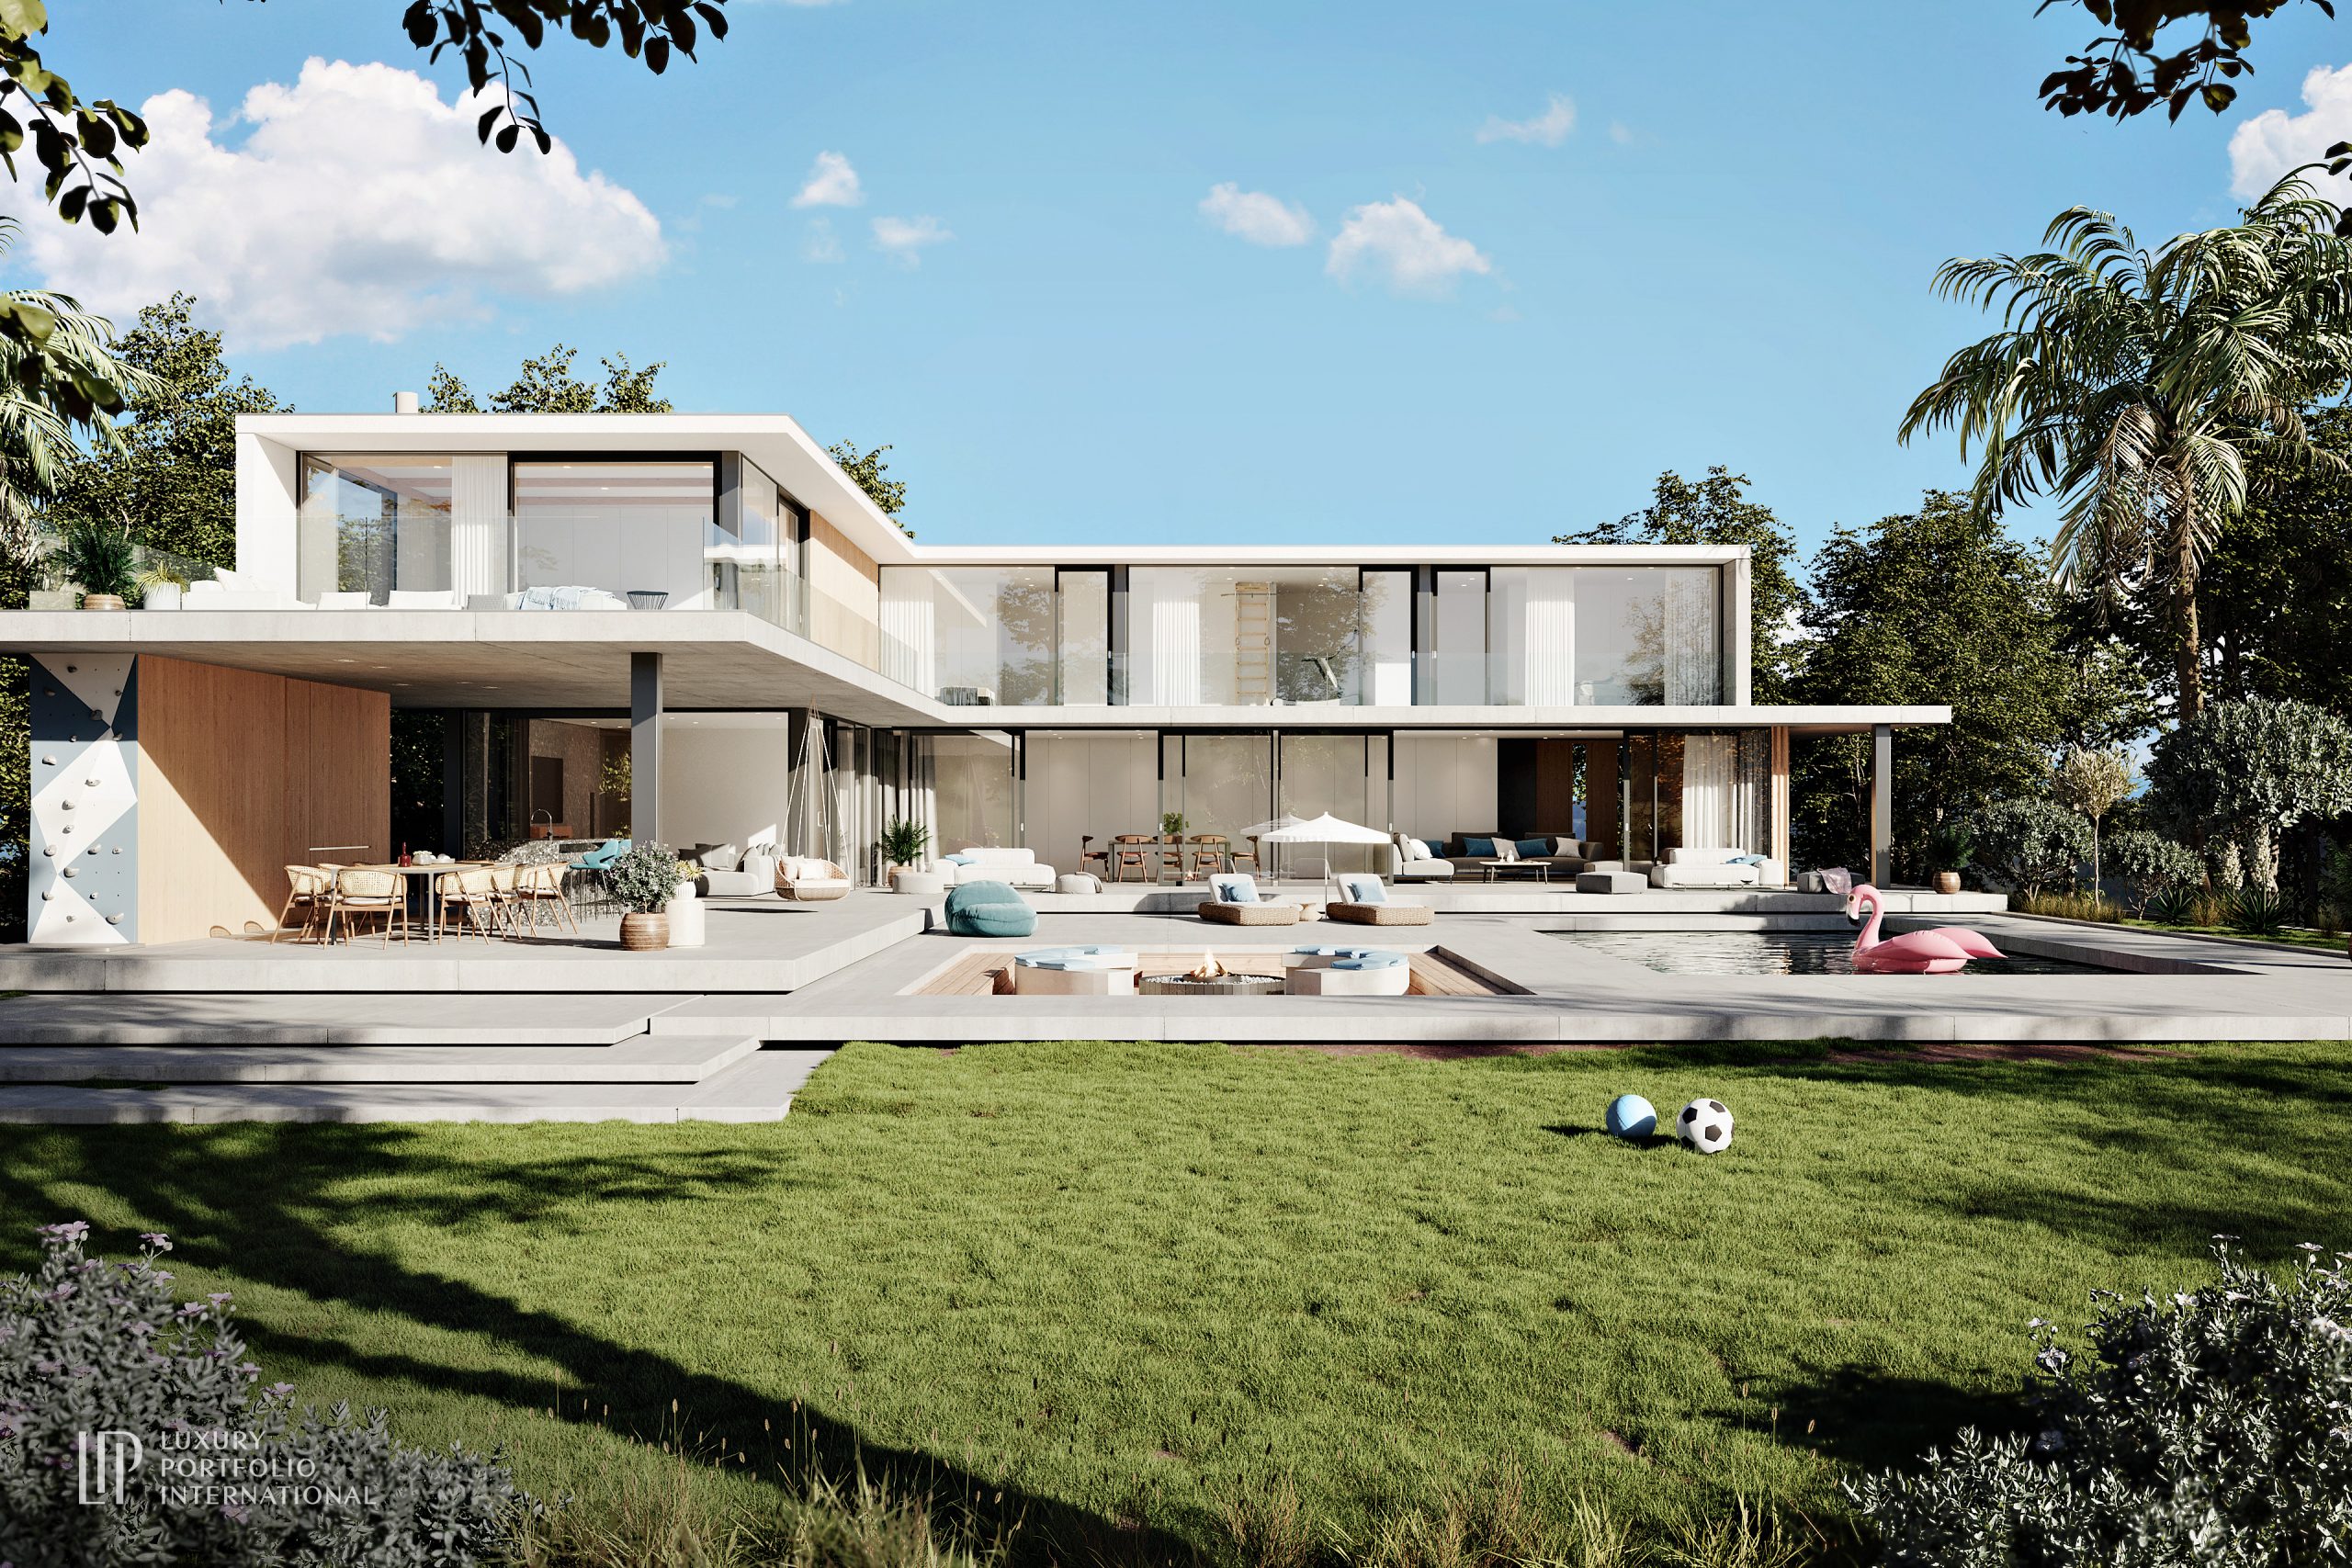 LPI Creates ‘Luxury Dream Home’ Model Based on Top Demands of High-Net-Worth Buyers